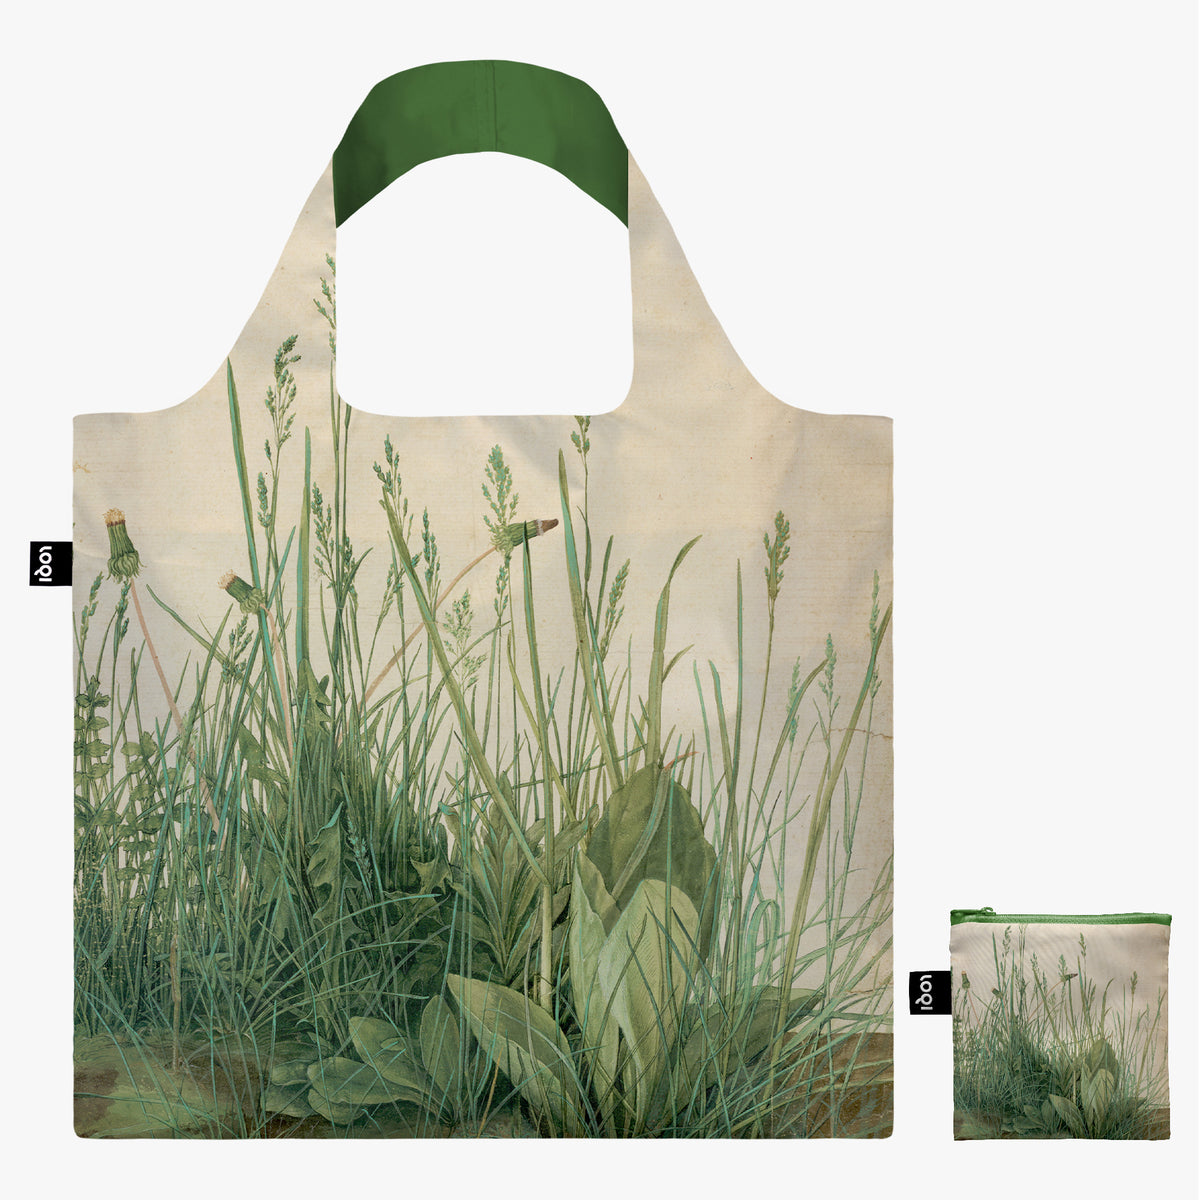 The Large Piece of Turf Recycled Bag